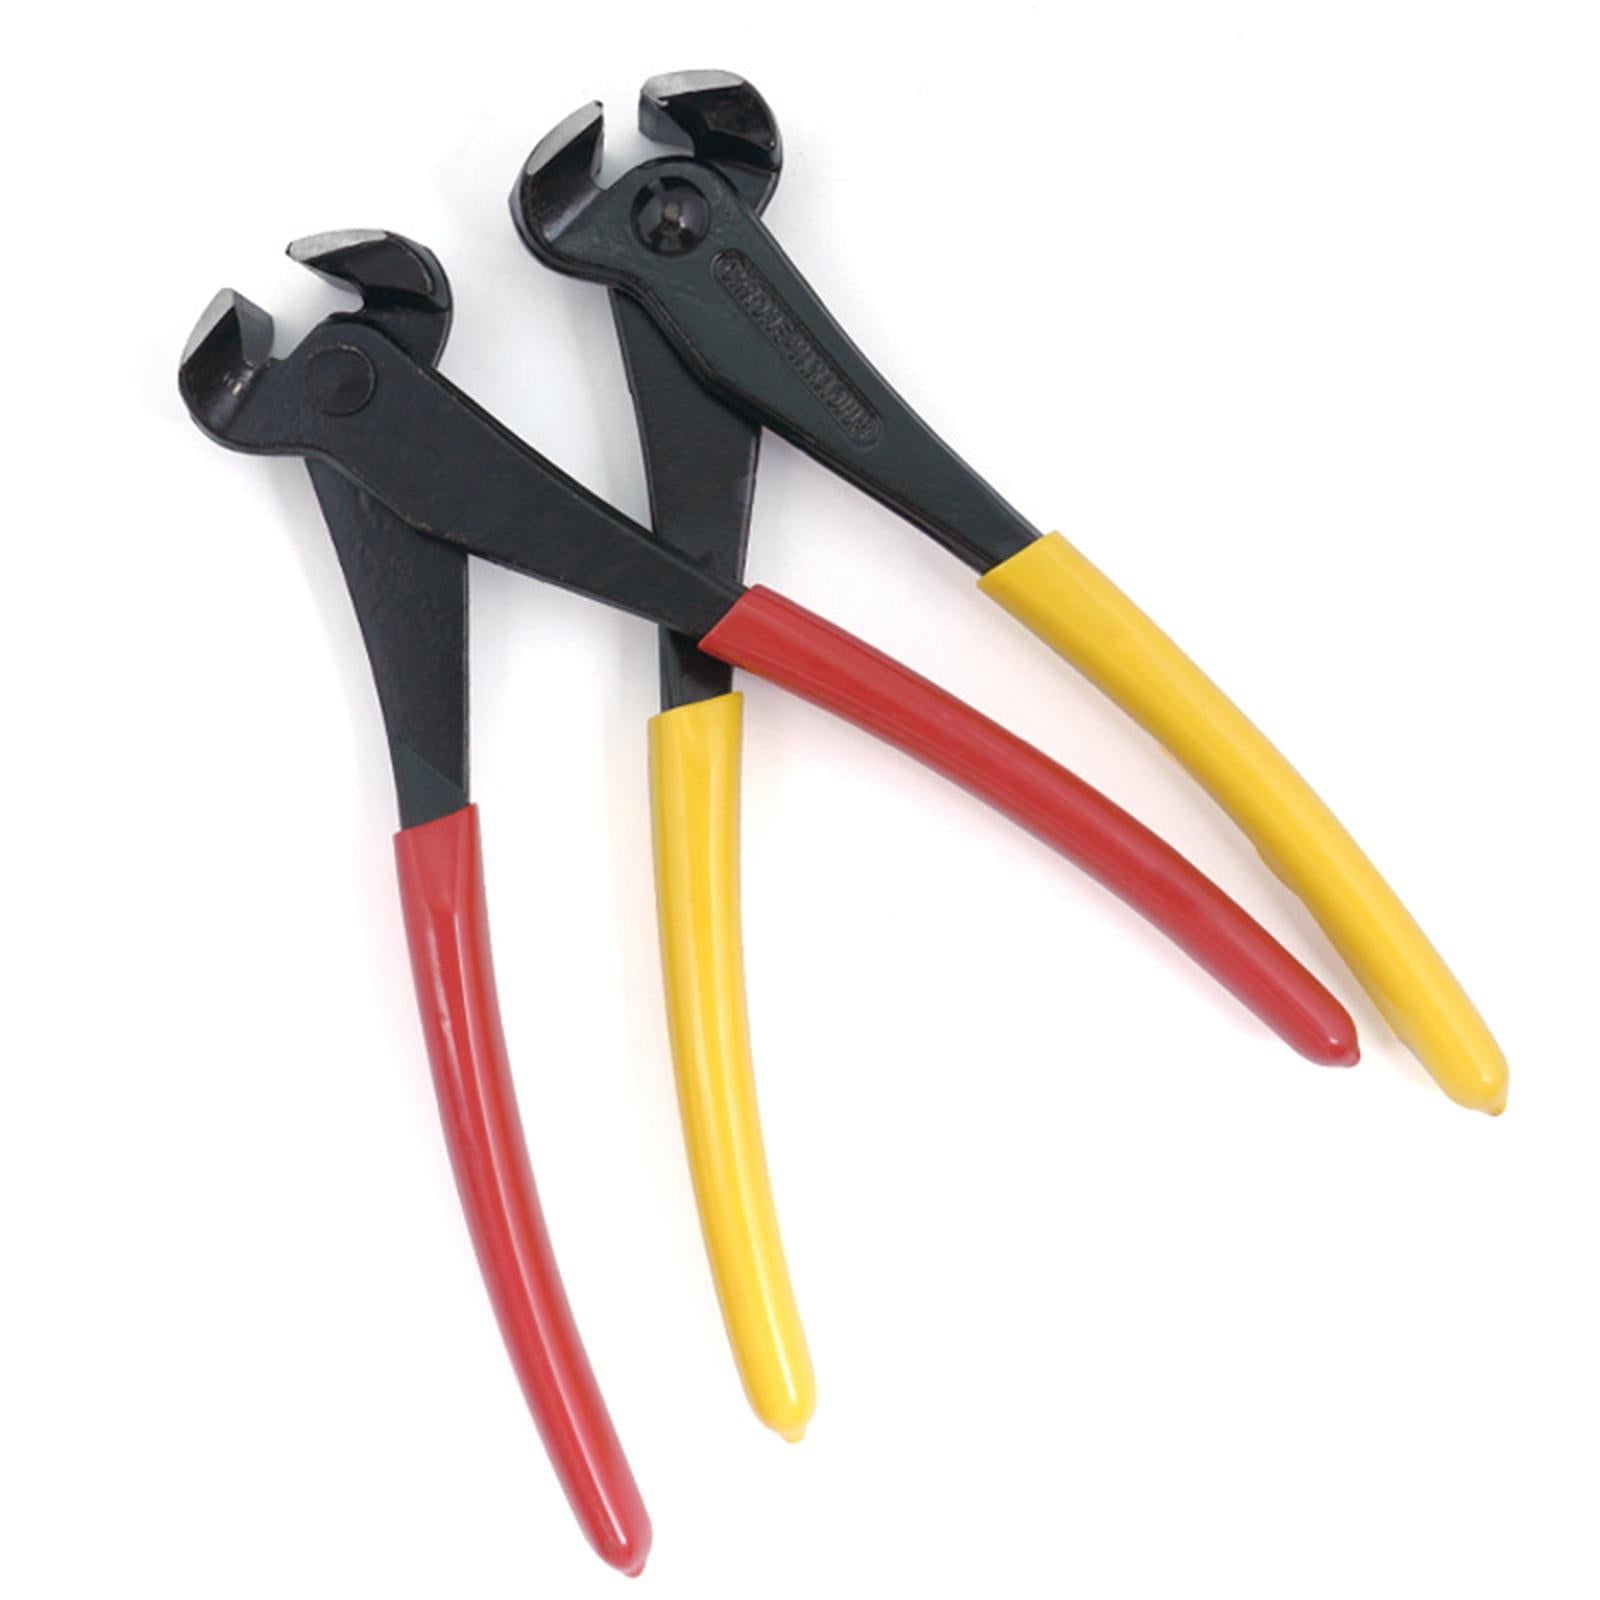 45 Steel Nail Puller Cutting Pliers Accessories Tool Repair for Change Heels 7inch